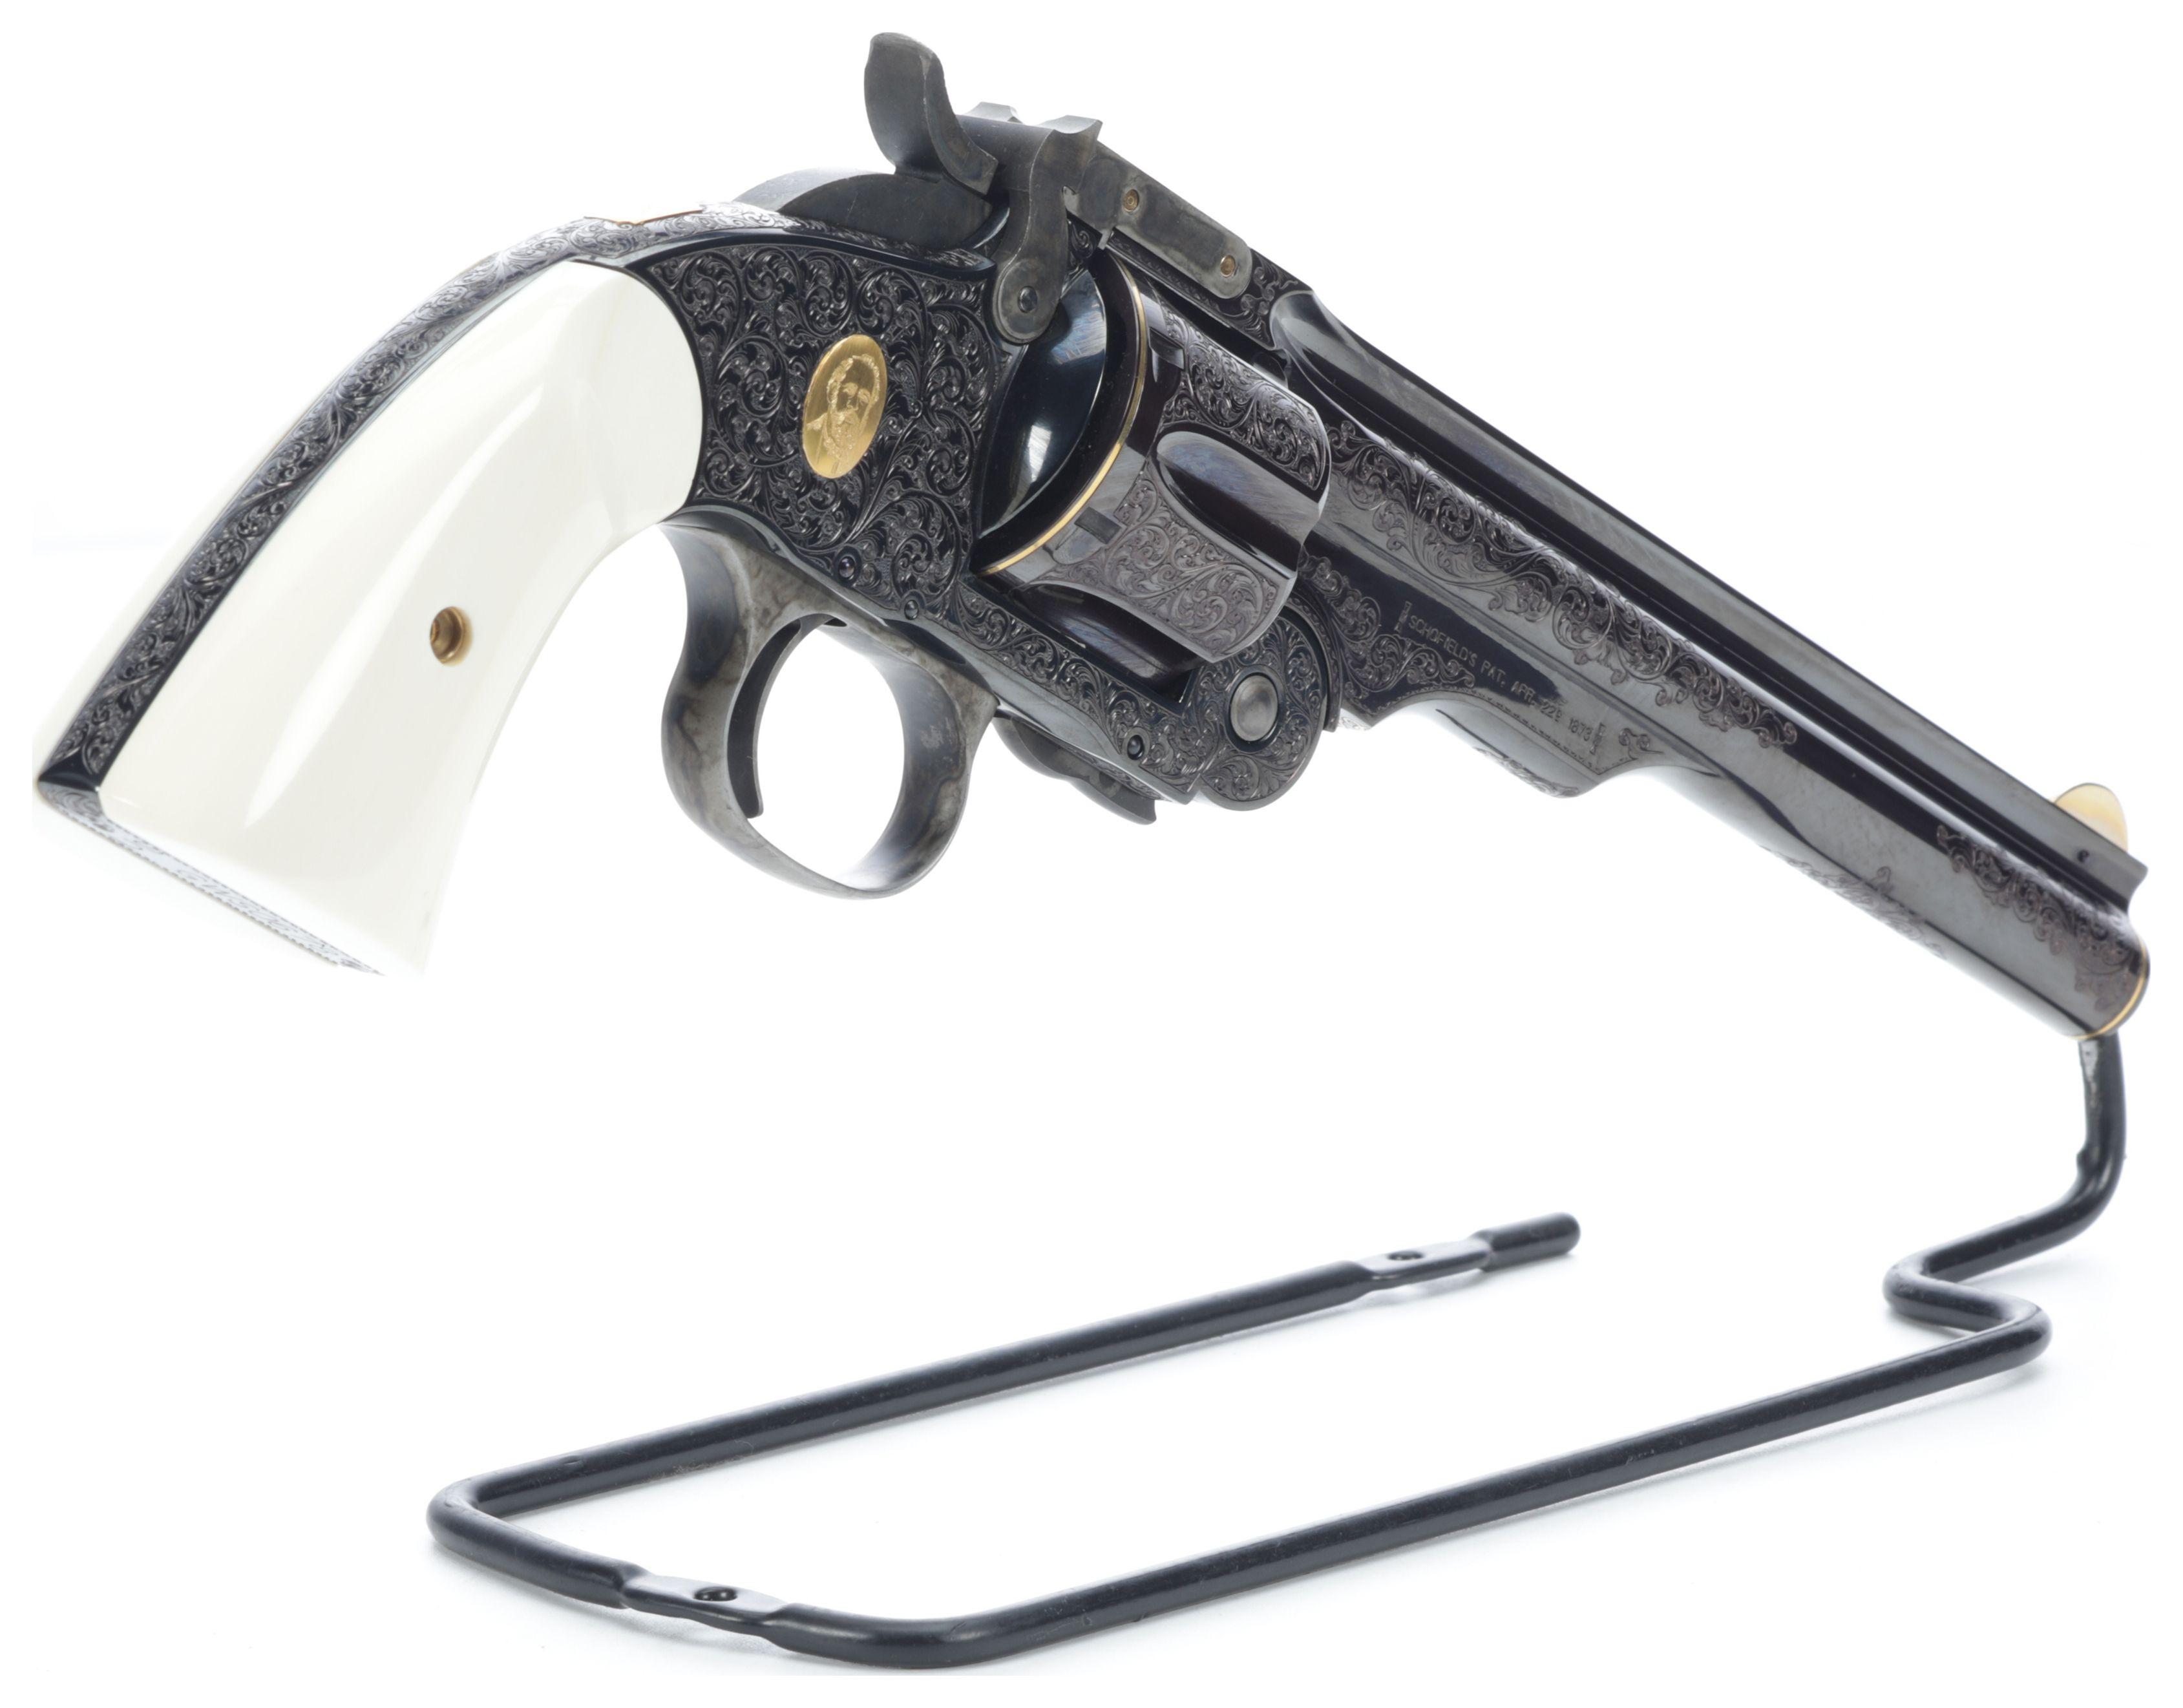 Engraved, Inlaid, and P. Piquette Signed S&W Schofield Revolver